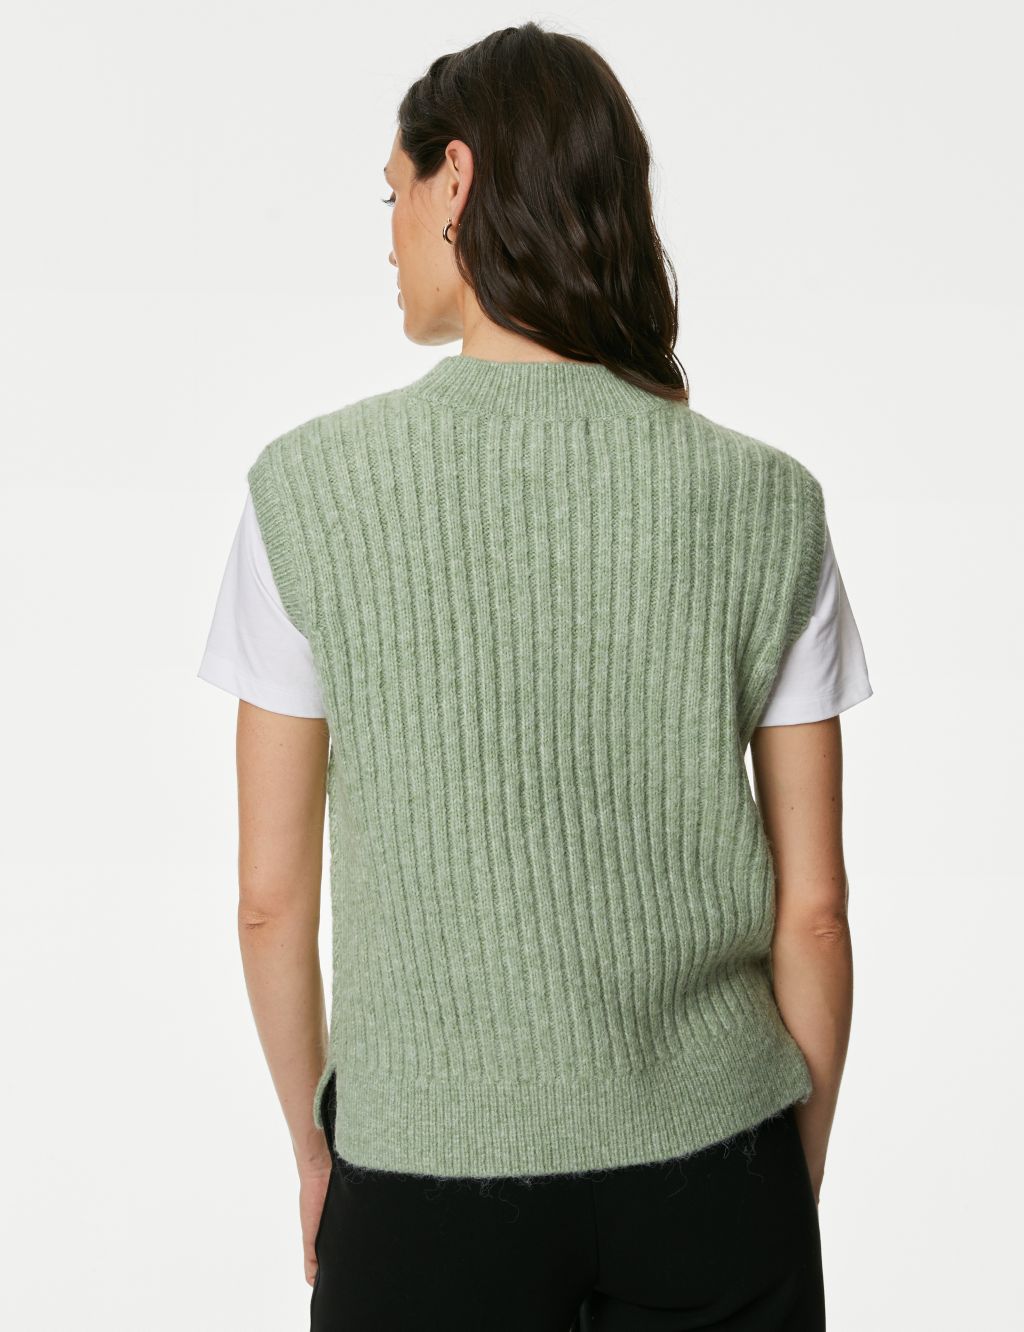 Textured Knitted Vest with Wool image 5